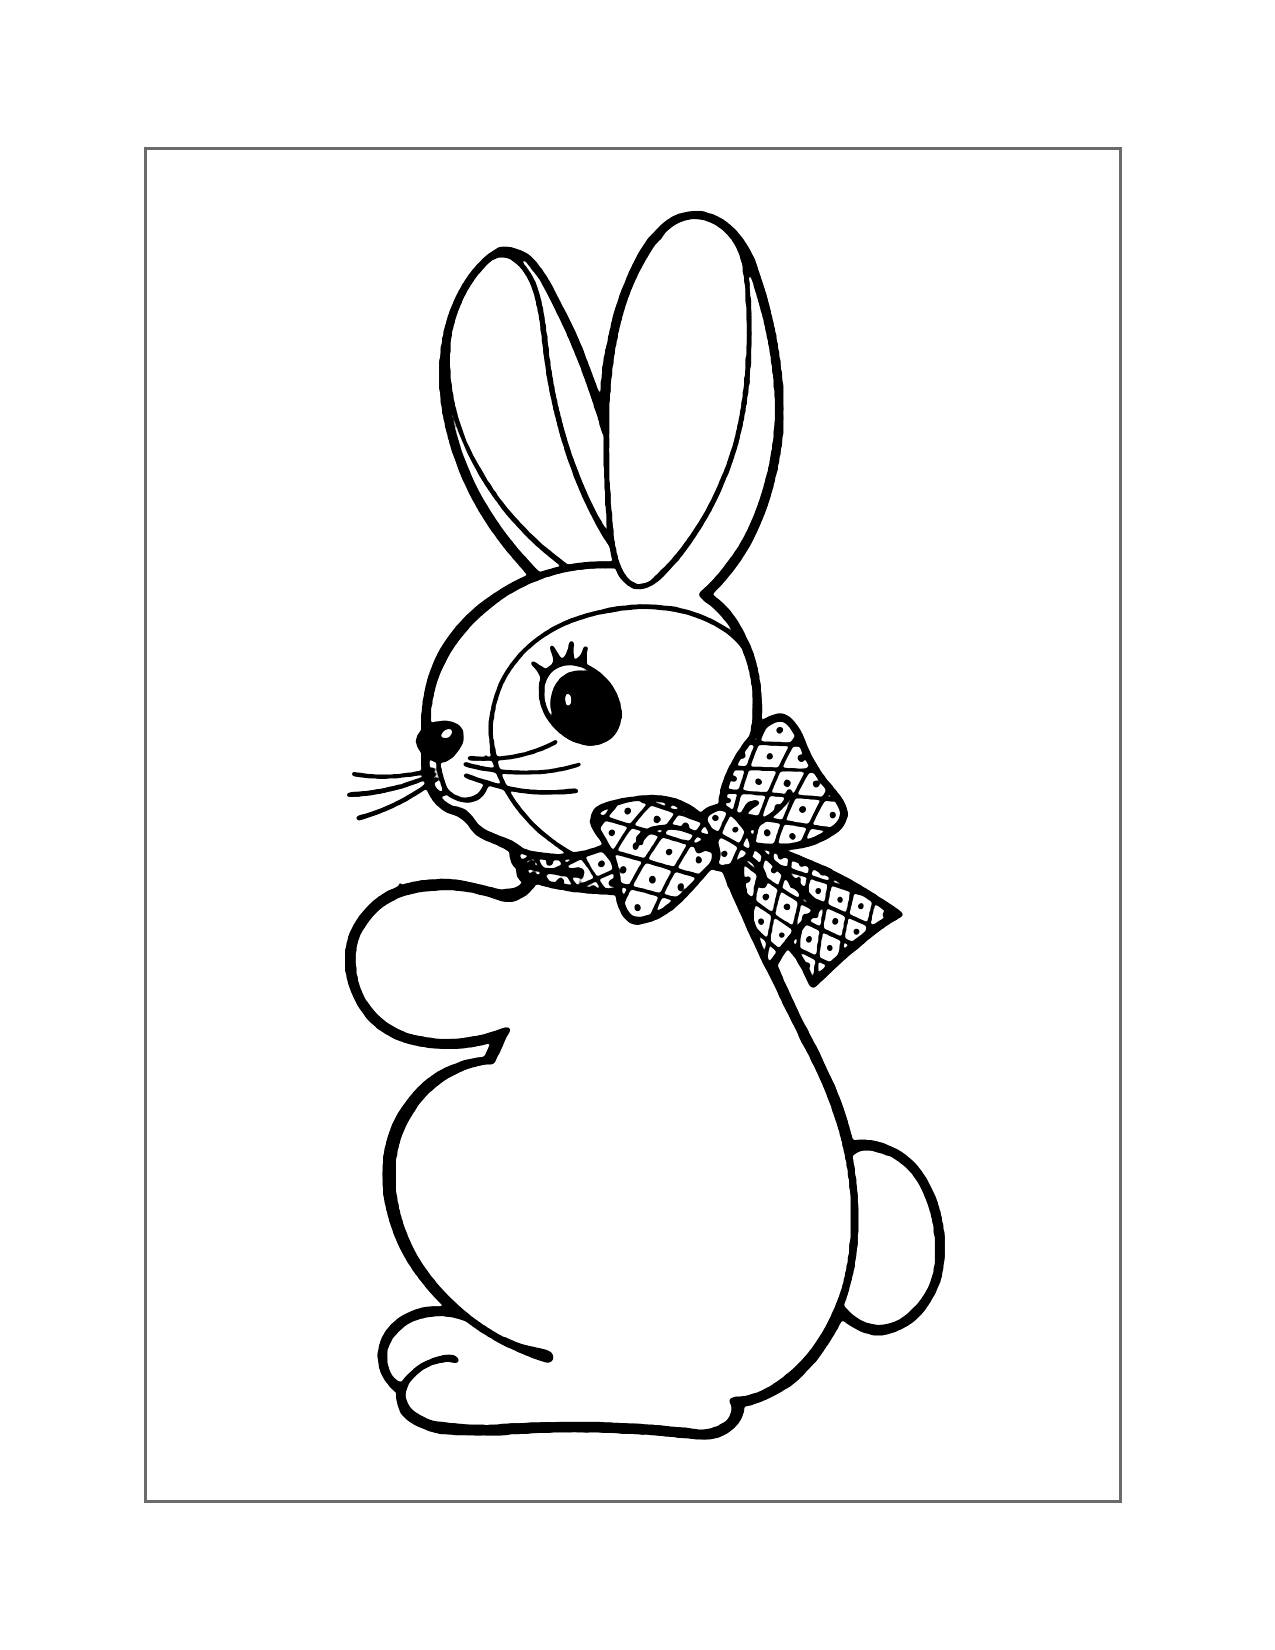 Rabbit Doll Toy Coloring Page